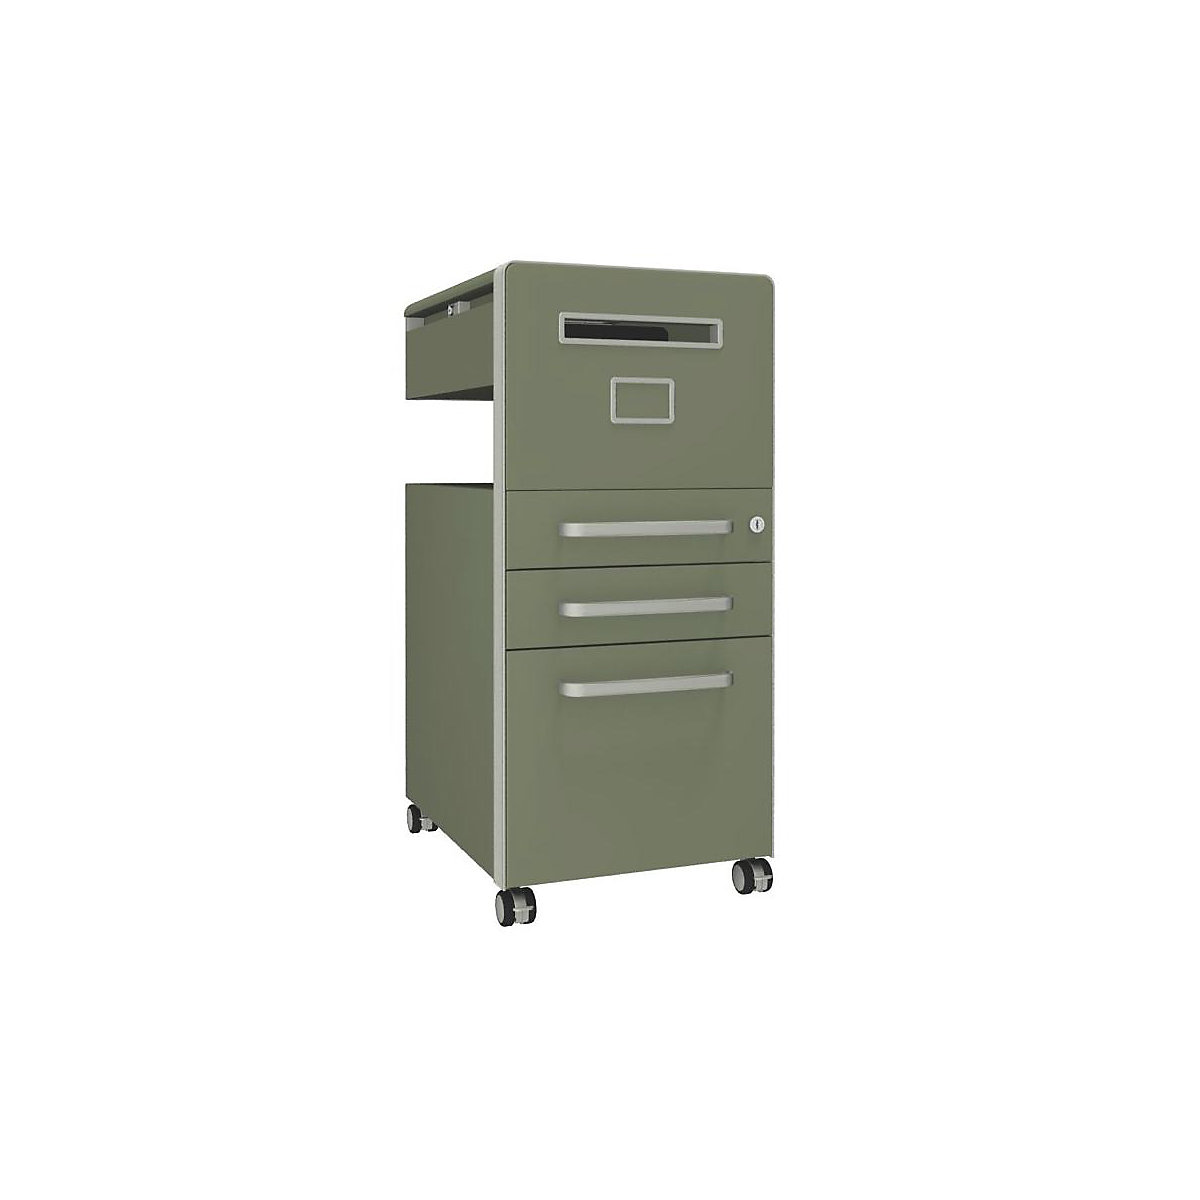 Bite™ pedestal furniture, with 1 whiteboard, opens on the right side – BISLEY, with 2 universal drawers, 1 suspension file drawer, regent-8